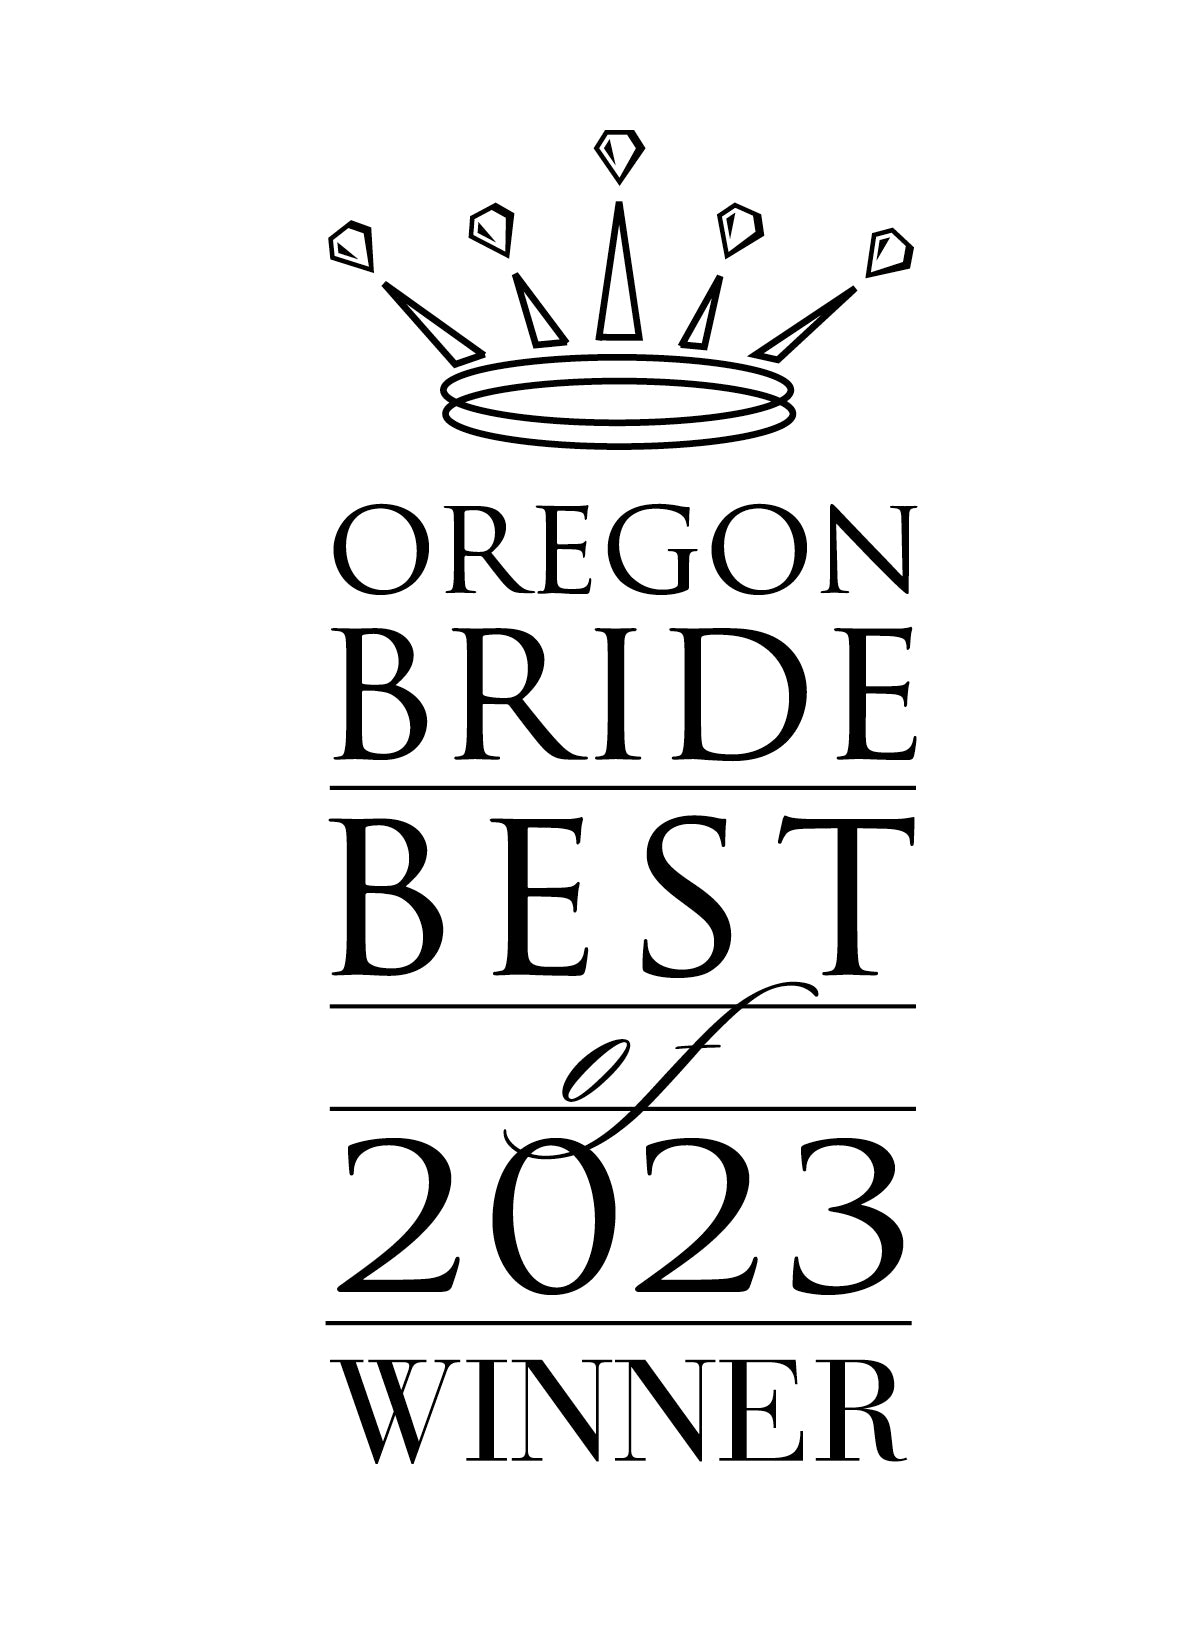 The House of Rose was awarded with the 2023 Oregon Bride magazine's Best Formalwear